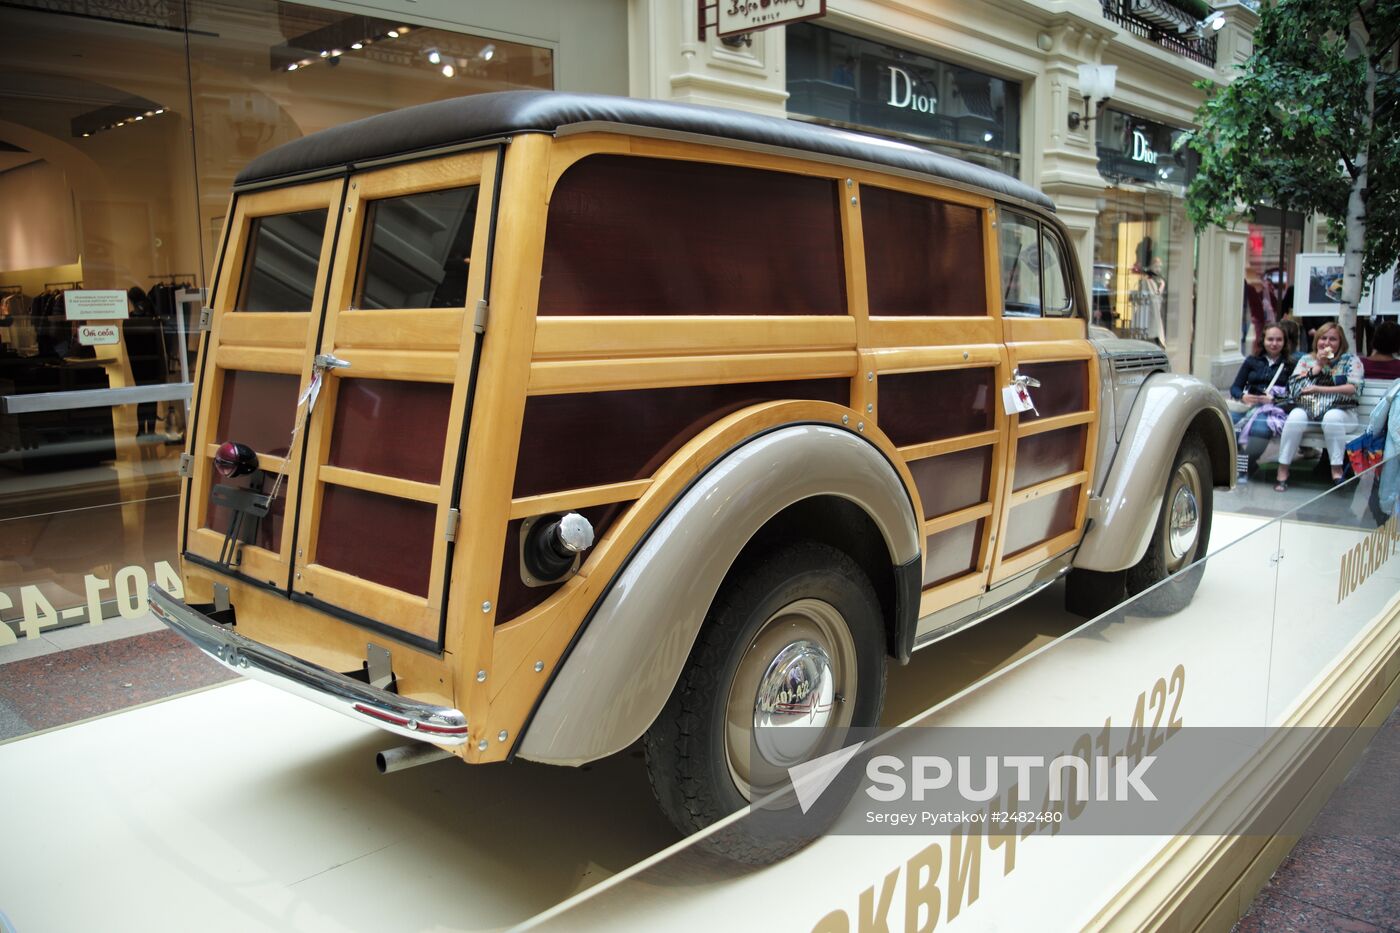 Exhibition of classic Soviet cars at GUM shopping mall